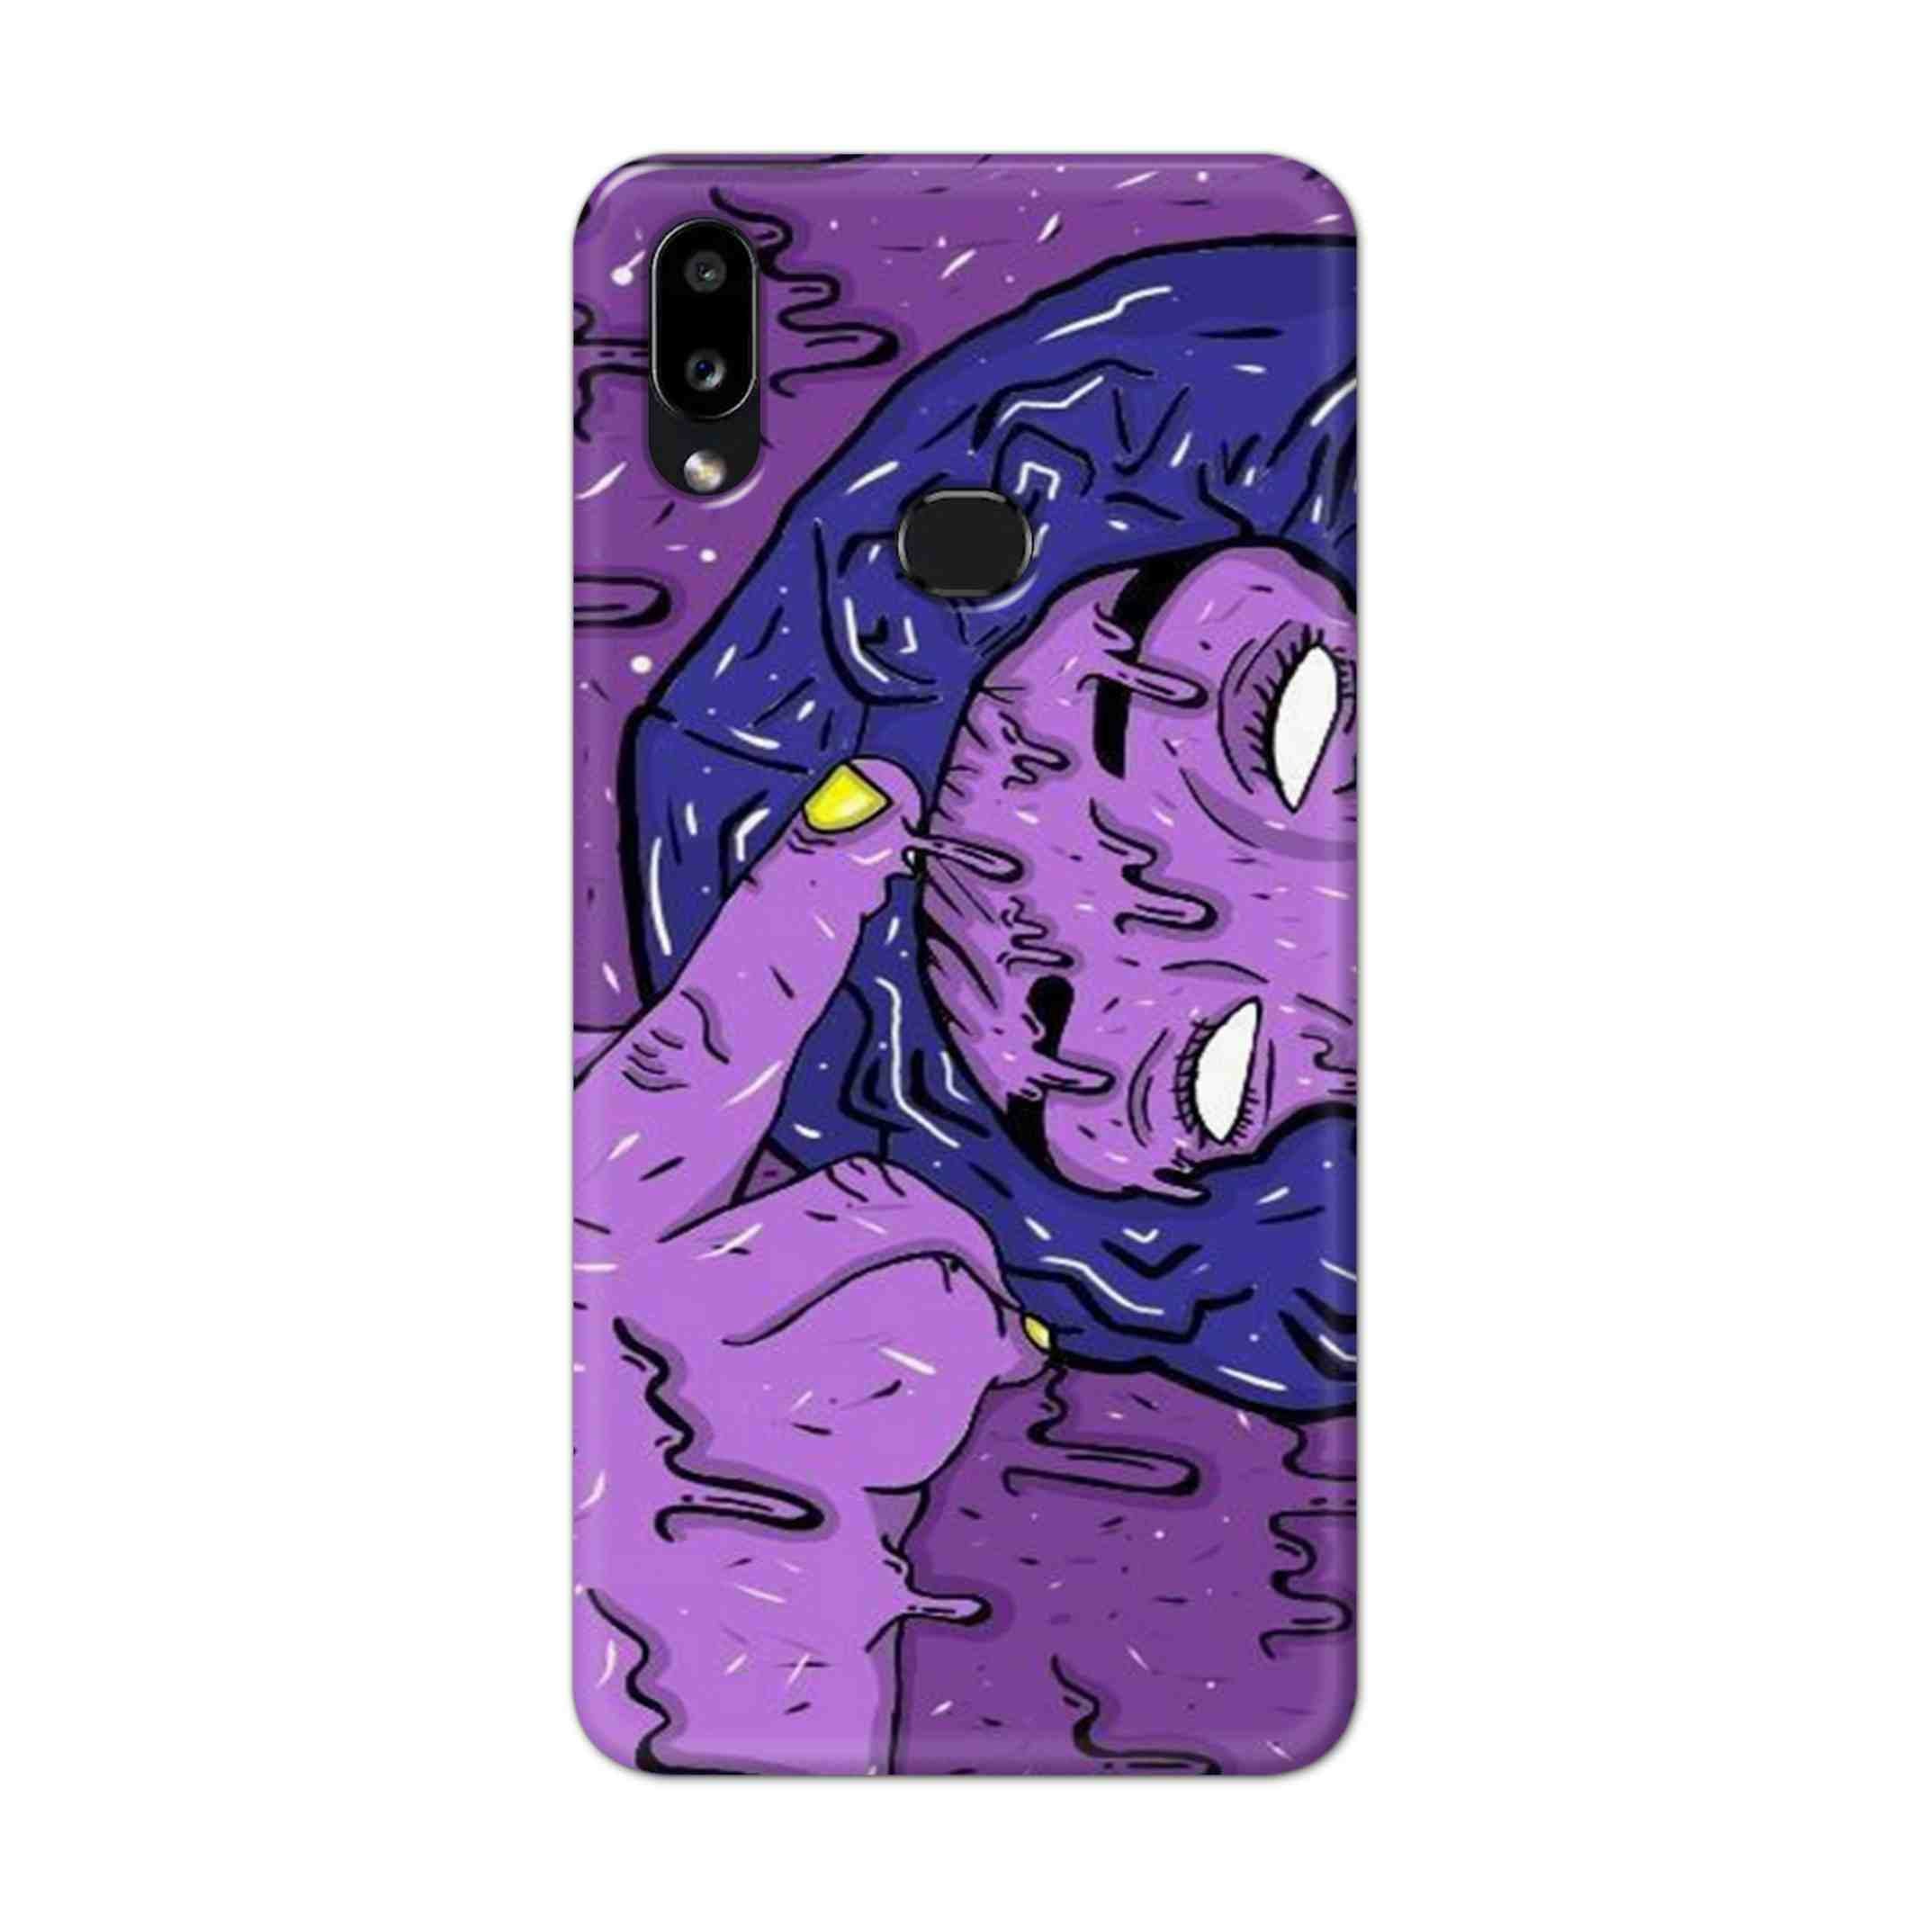 Buy Dashing Art Hard Back Mobile Phone Case Cover For Samsung Galaxy M01s Online